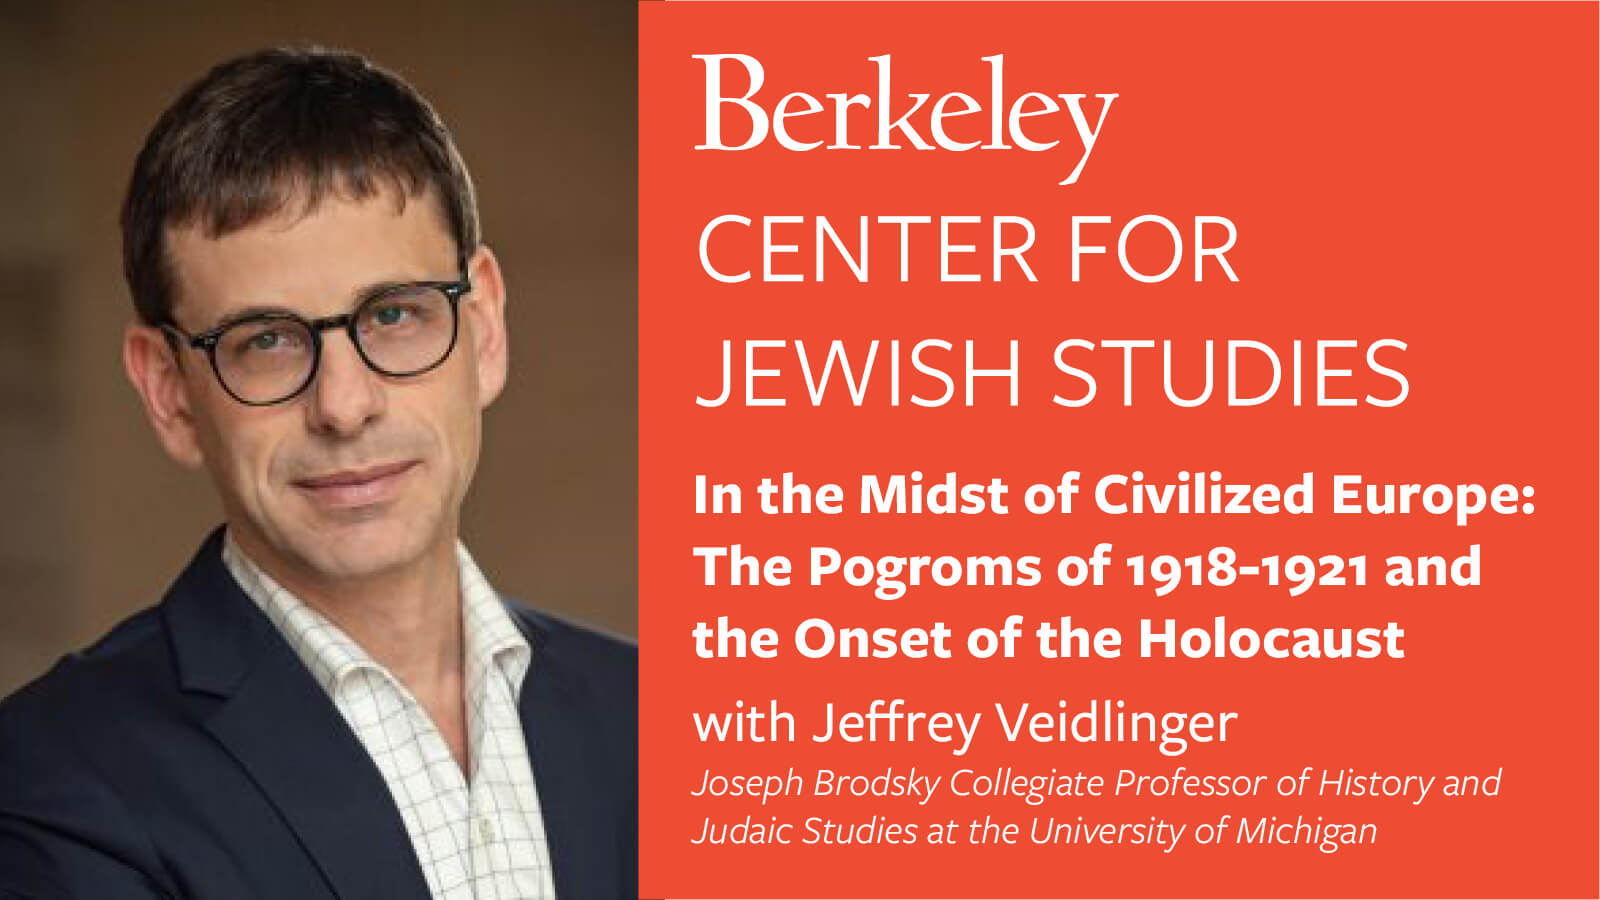 Berkeley Center for Jewish Studies. In the Midst of Civilized Europe: The Pogroms of 1918-1921 and the Onset of the Holocaust with Jeffrey Veidlinger